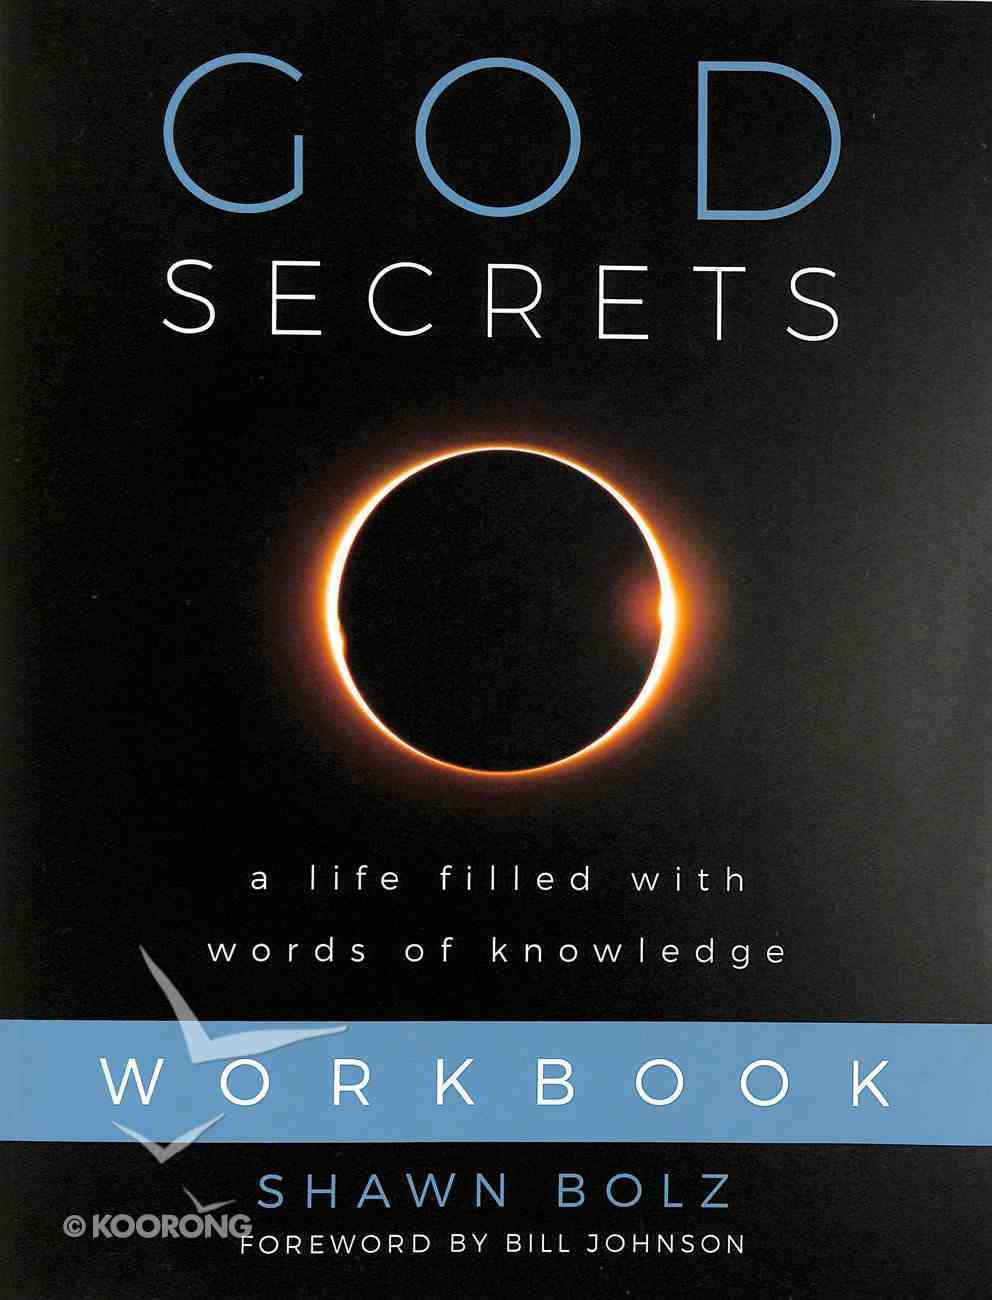 God Secrets: A Life Filled With Words of Knowledge (Workbook) Paperback